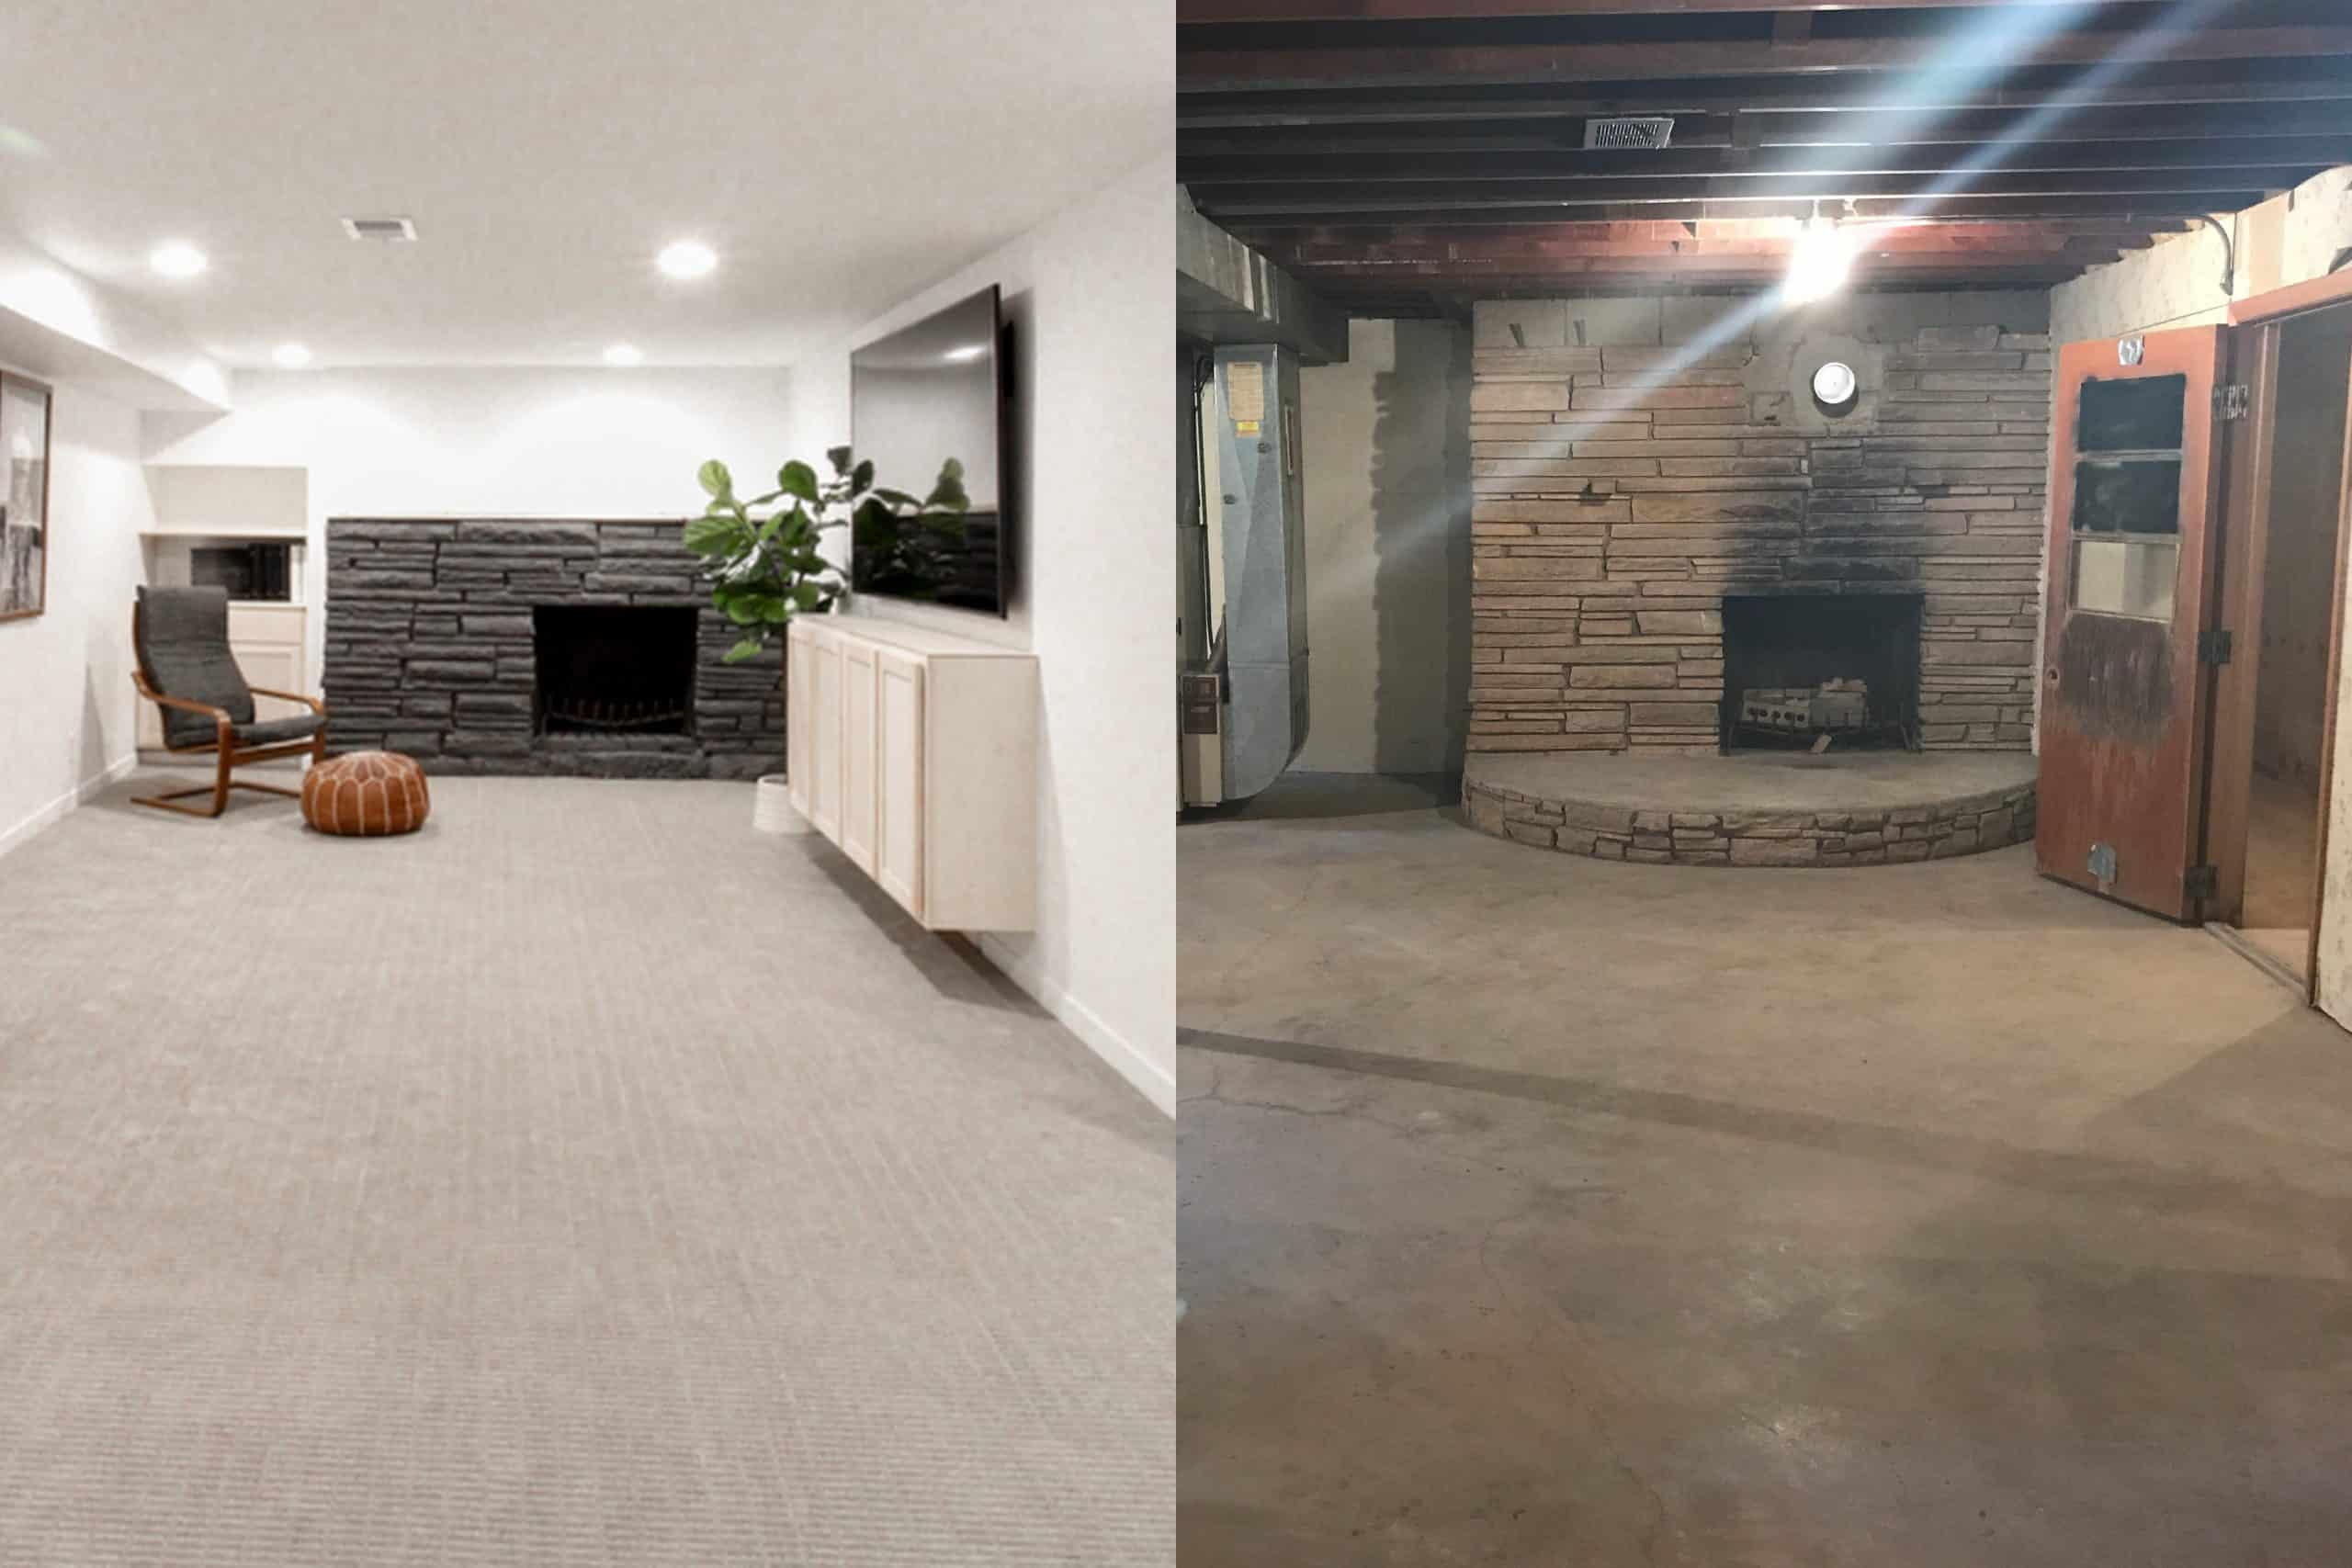 How Much Does it Cost to Finish a Basement?